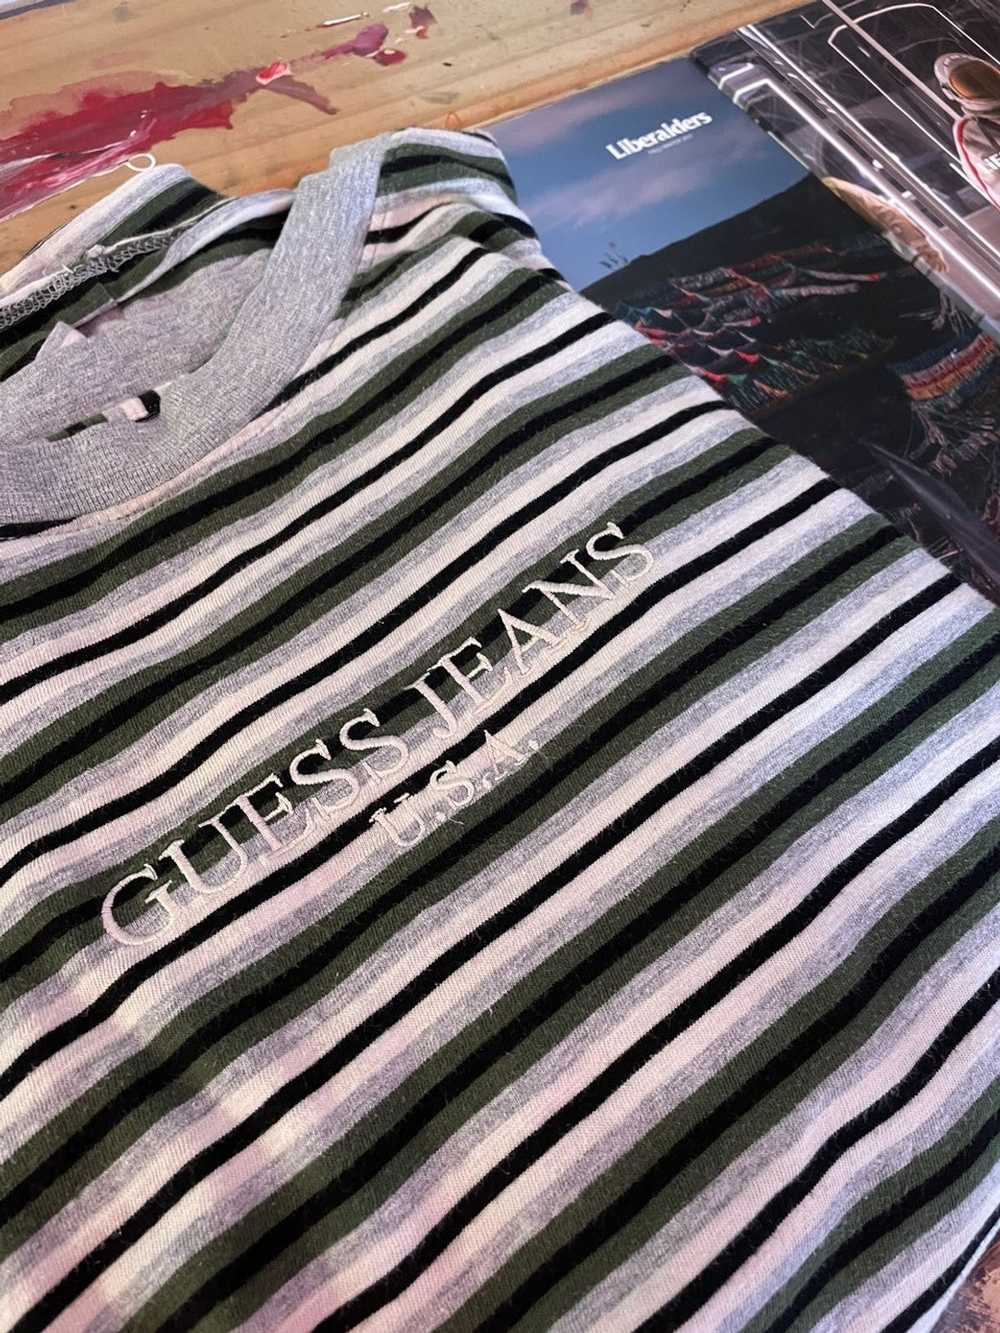 Guess Guess Jeans Striped Tee - image 3